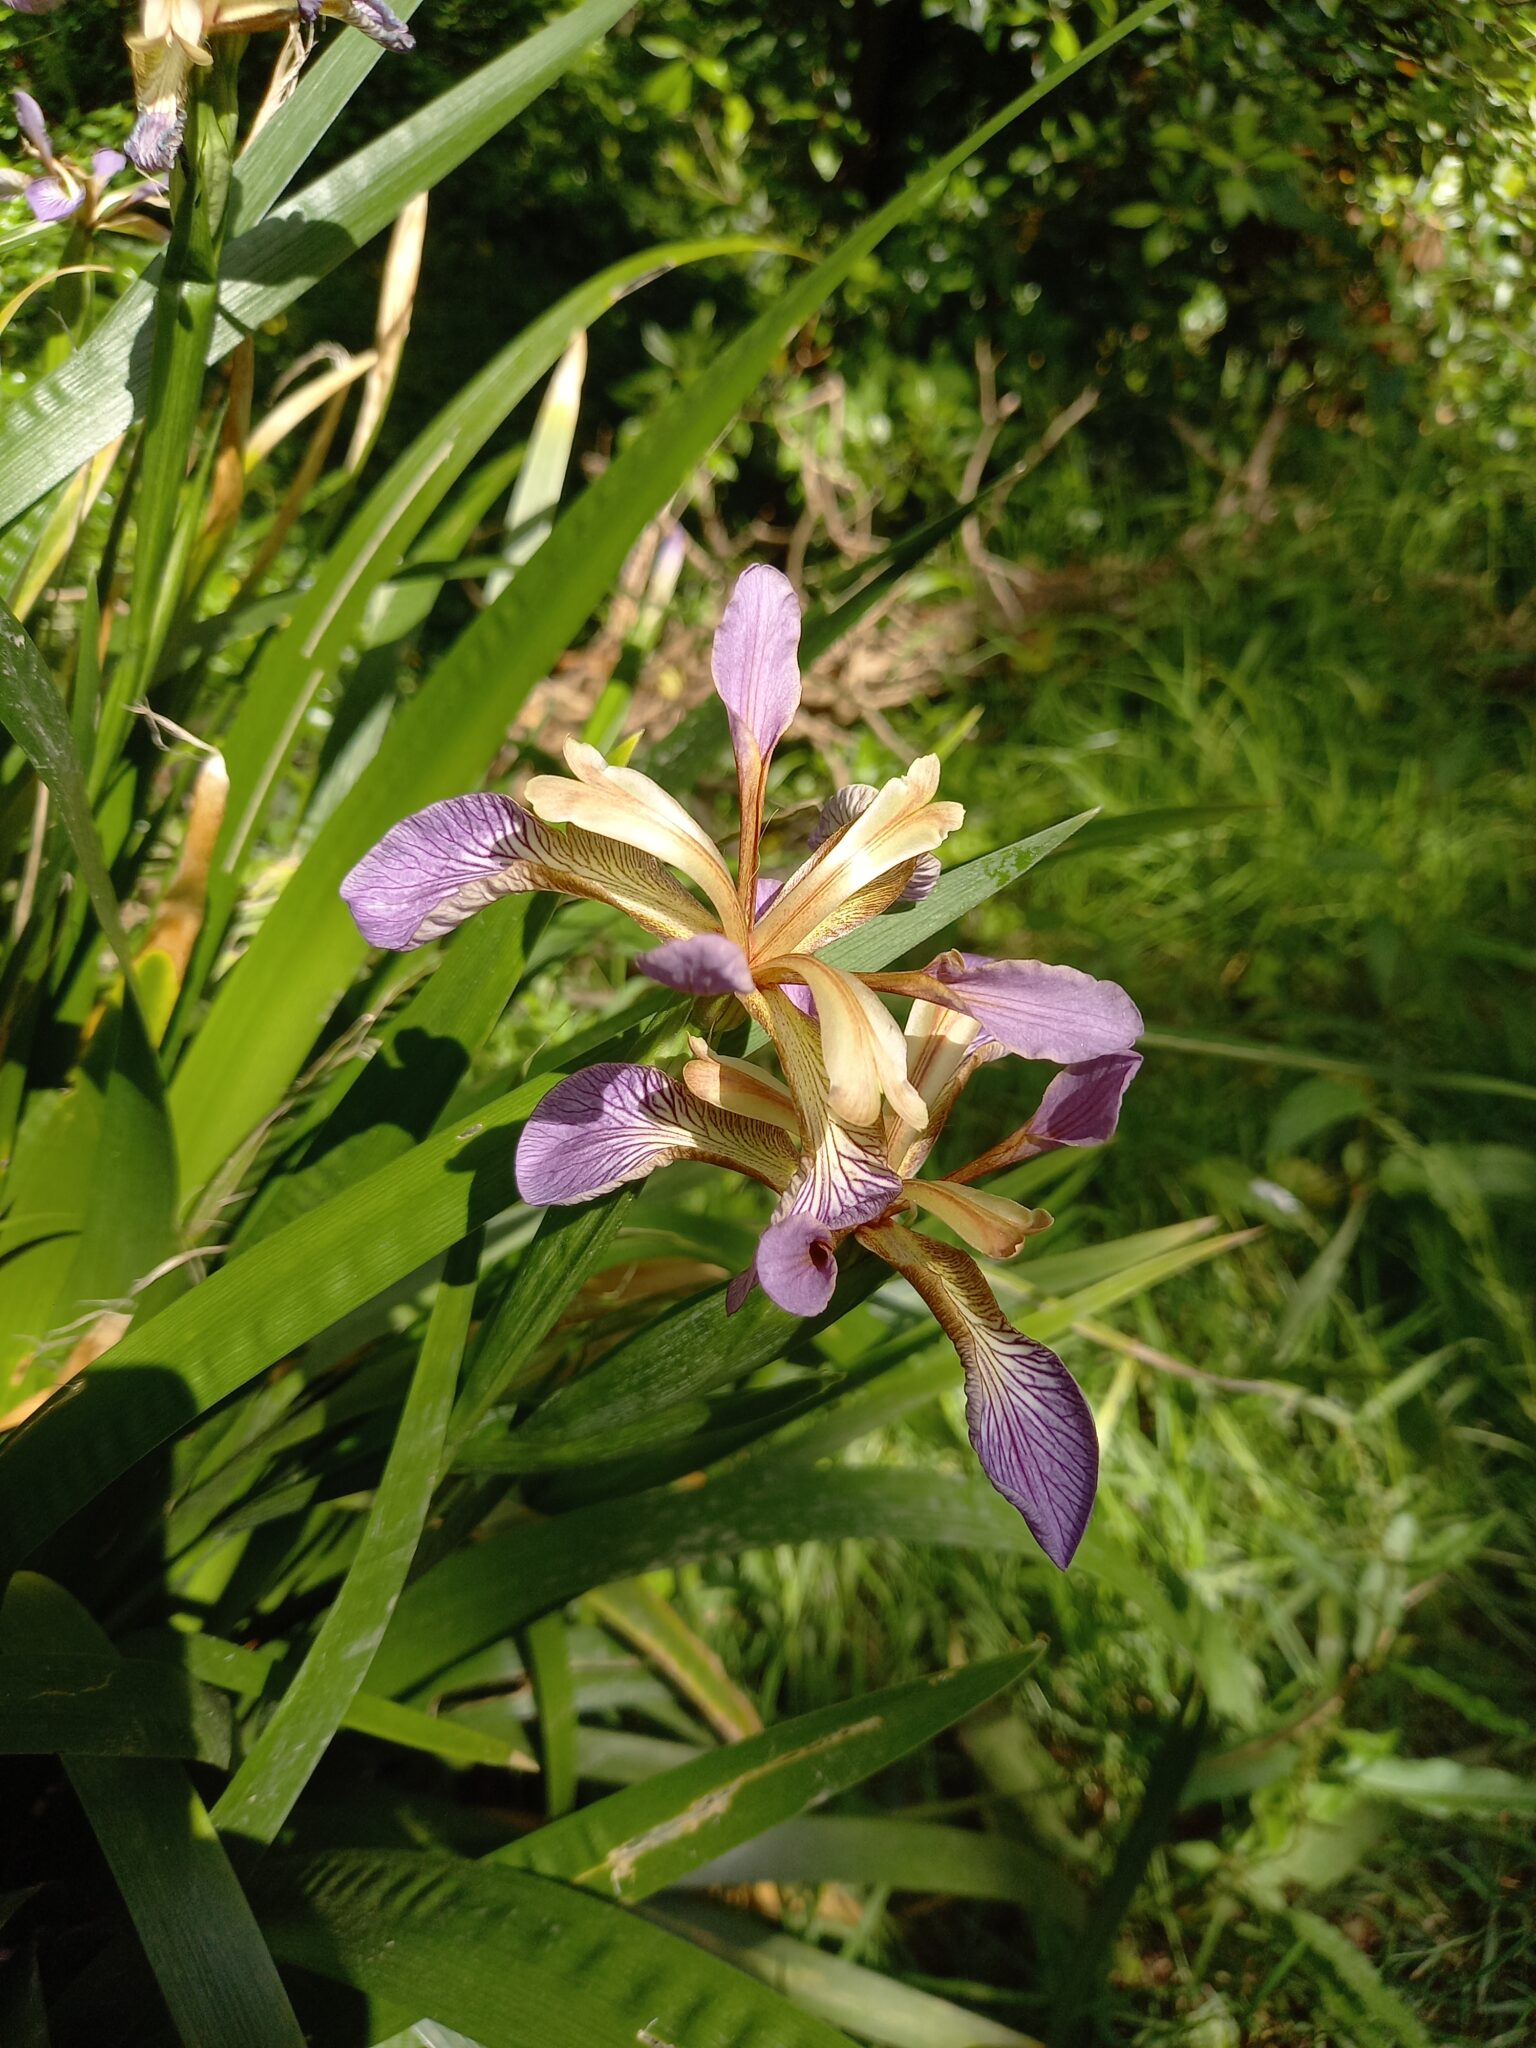 Stinking iris - two flowers of the iris, each with has six delicate, petal-like segments known as tepals that are lavender and white with darker purple veining.